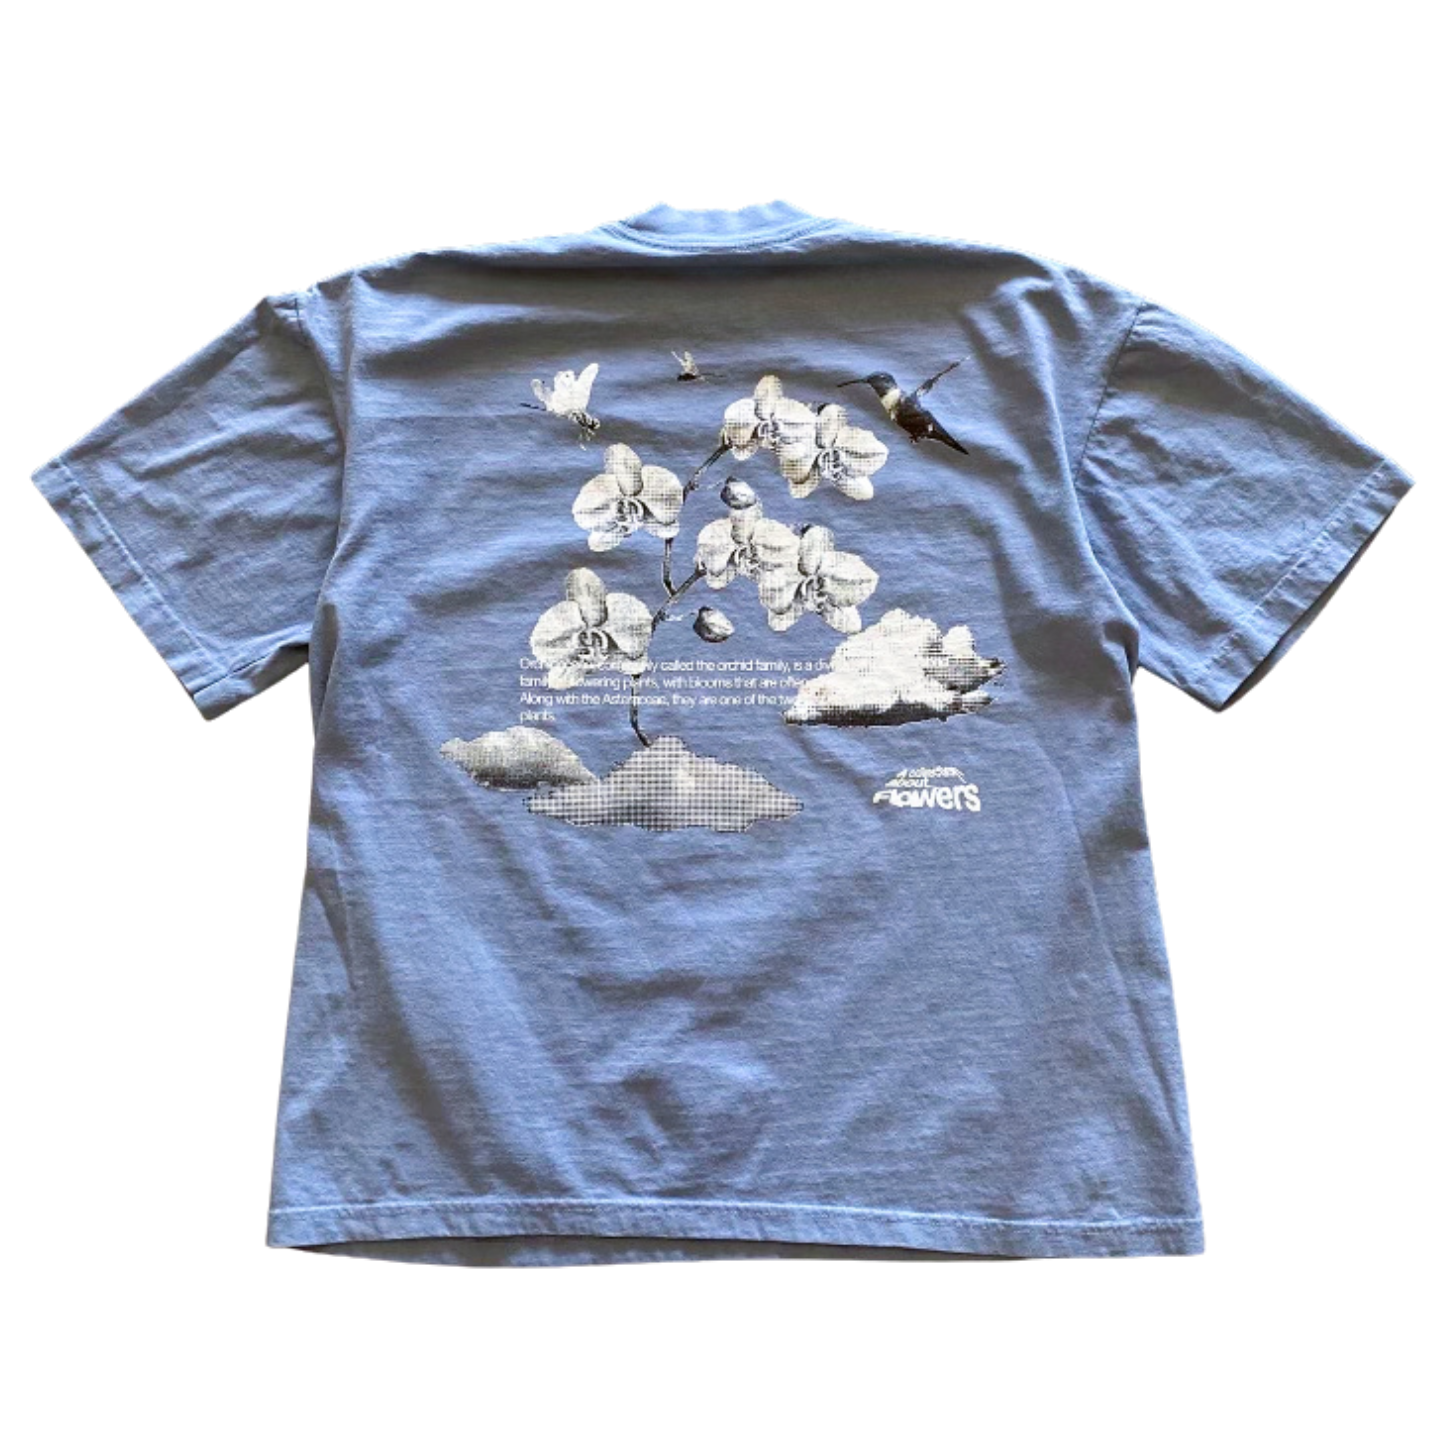 Orchid Tee Blue